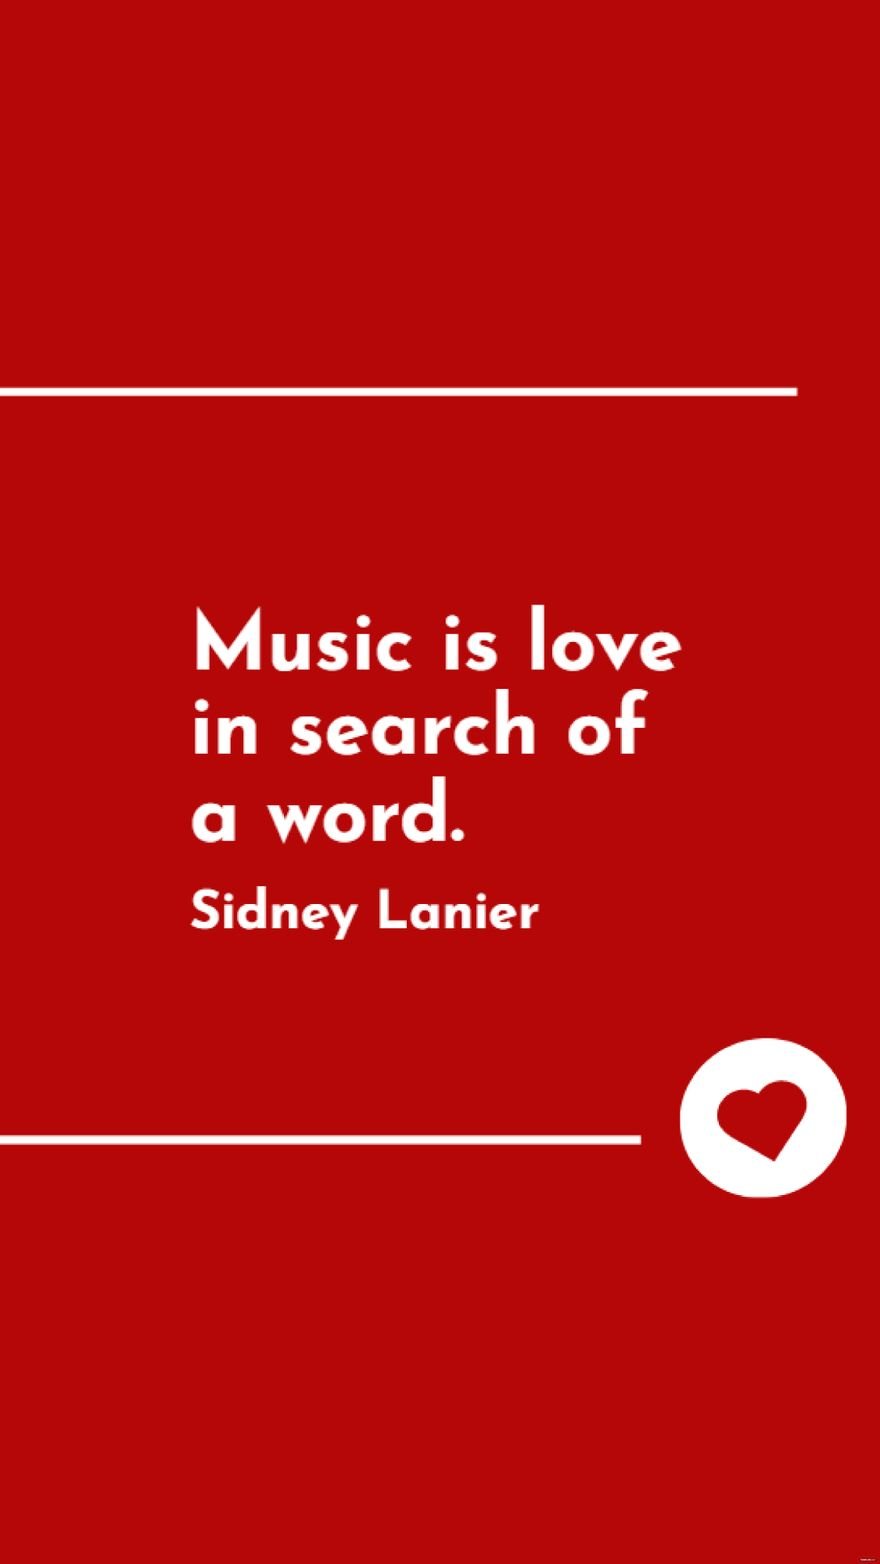 Free Sidney Lanier - Music is love in search of a word.